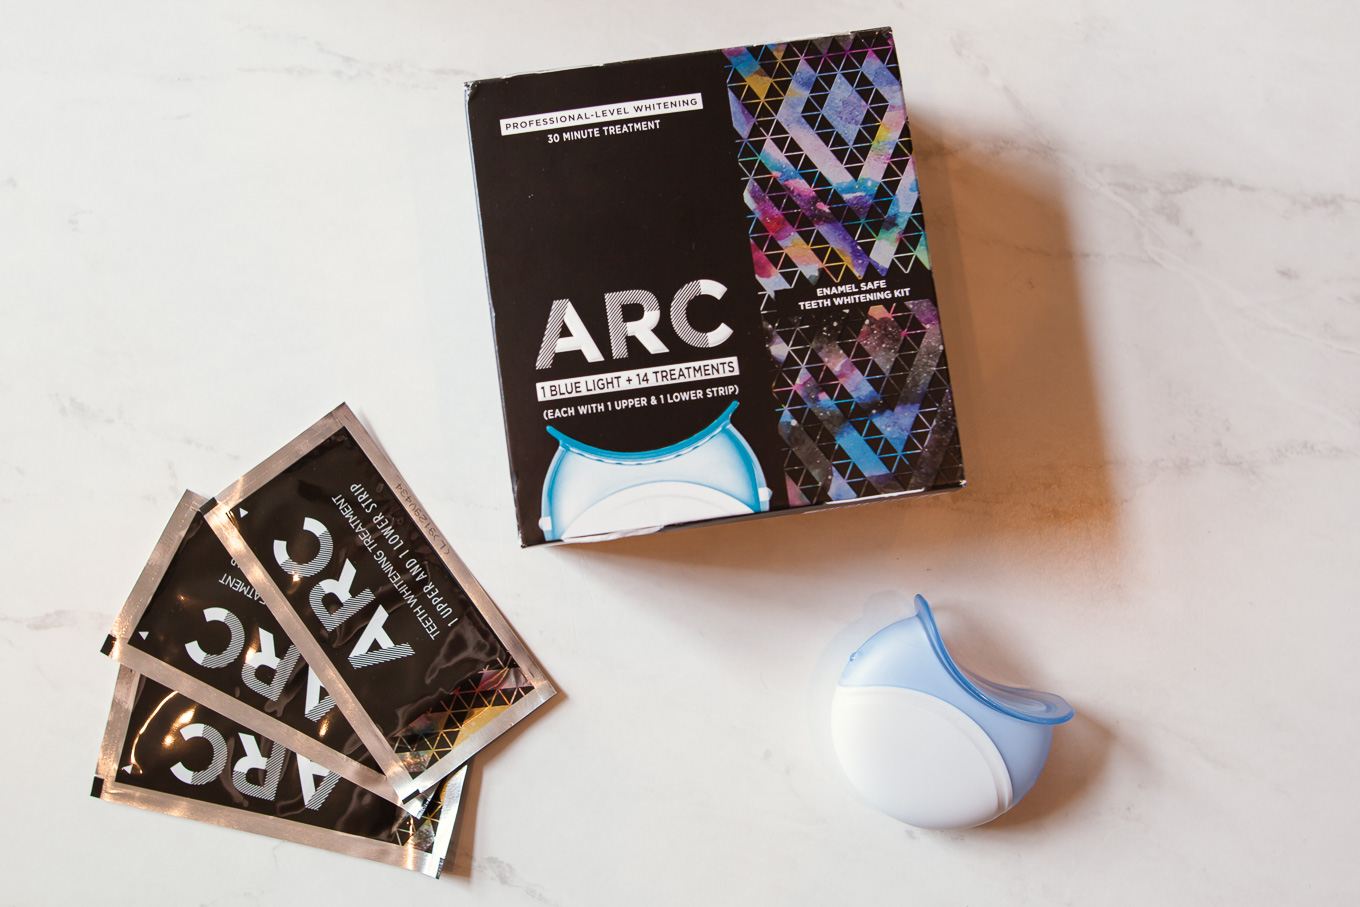 ARCSmile smile whitening system review featured by top US beauty blog, Glass of Glam